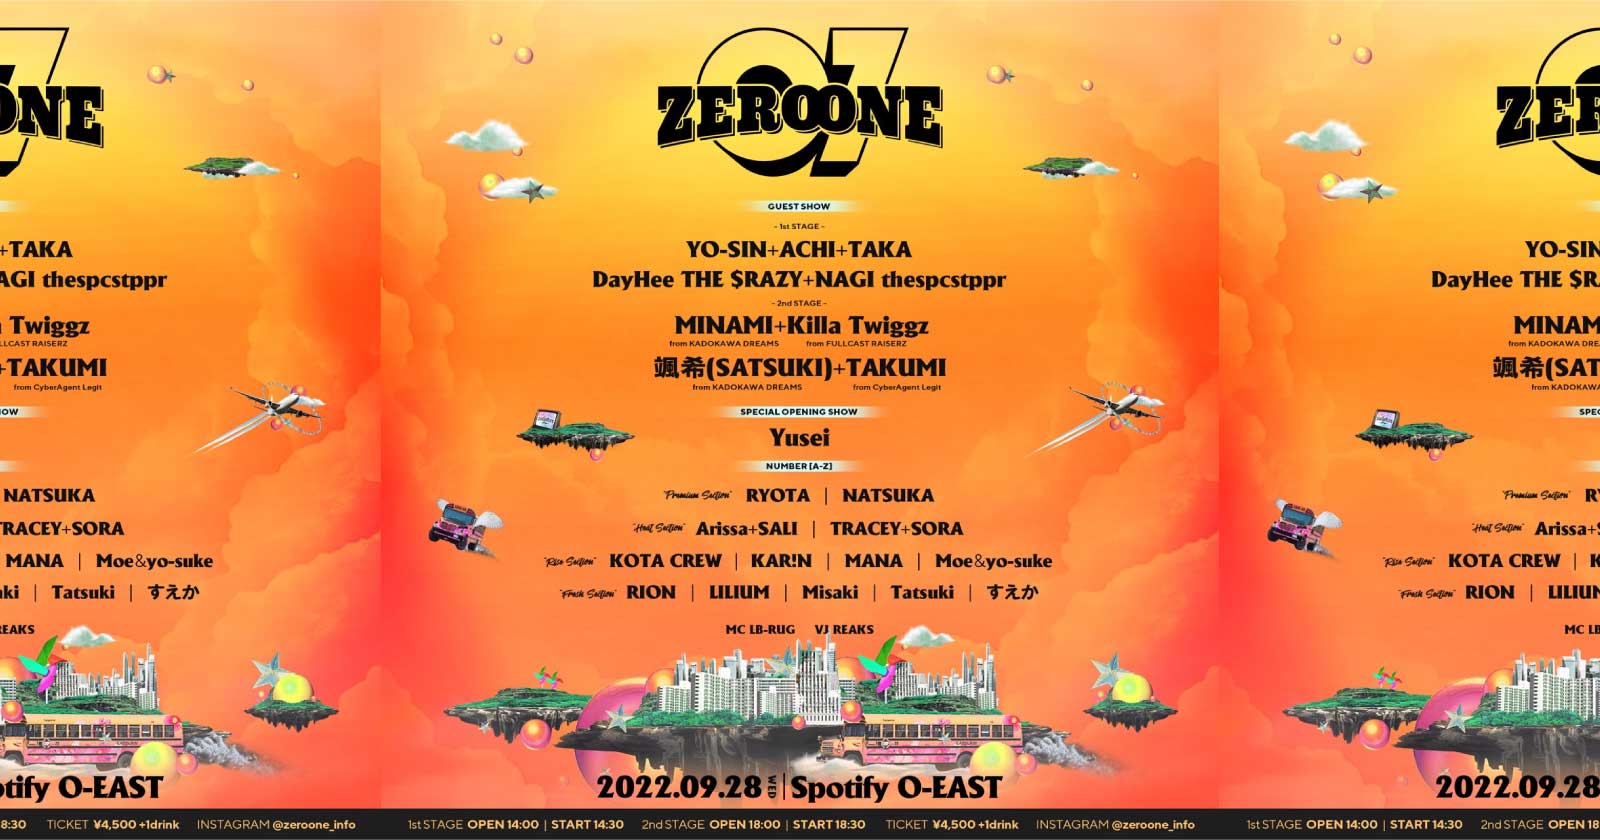 ZERO ONE at Spotify O-EAST